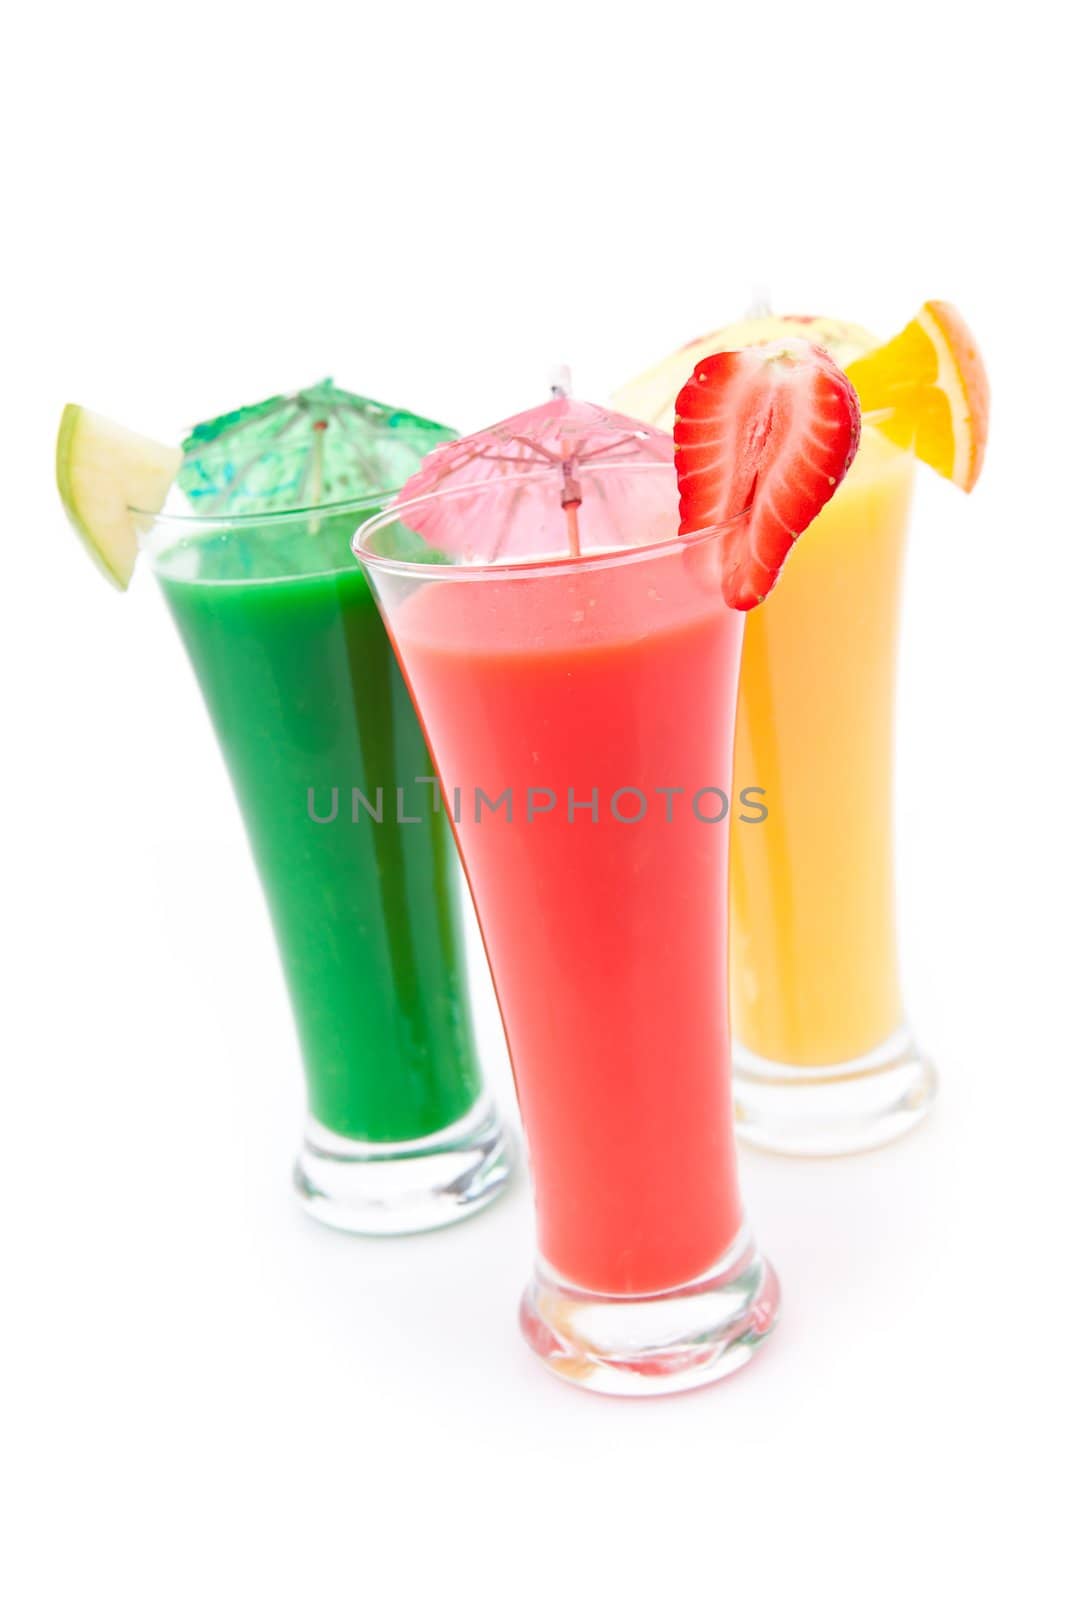 Fruit pieces and cocktail umbrella on glasses against white background